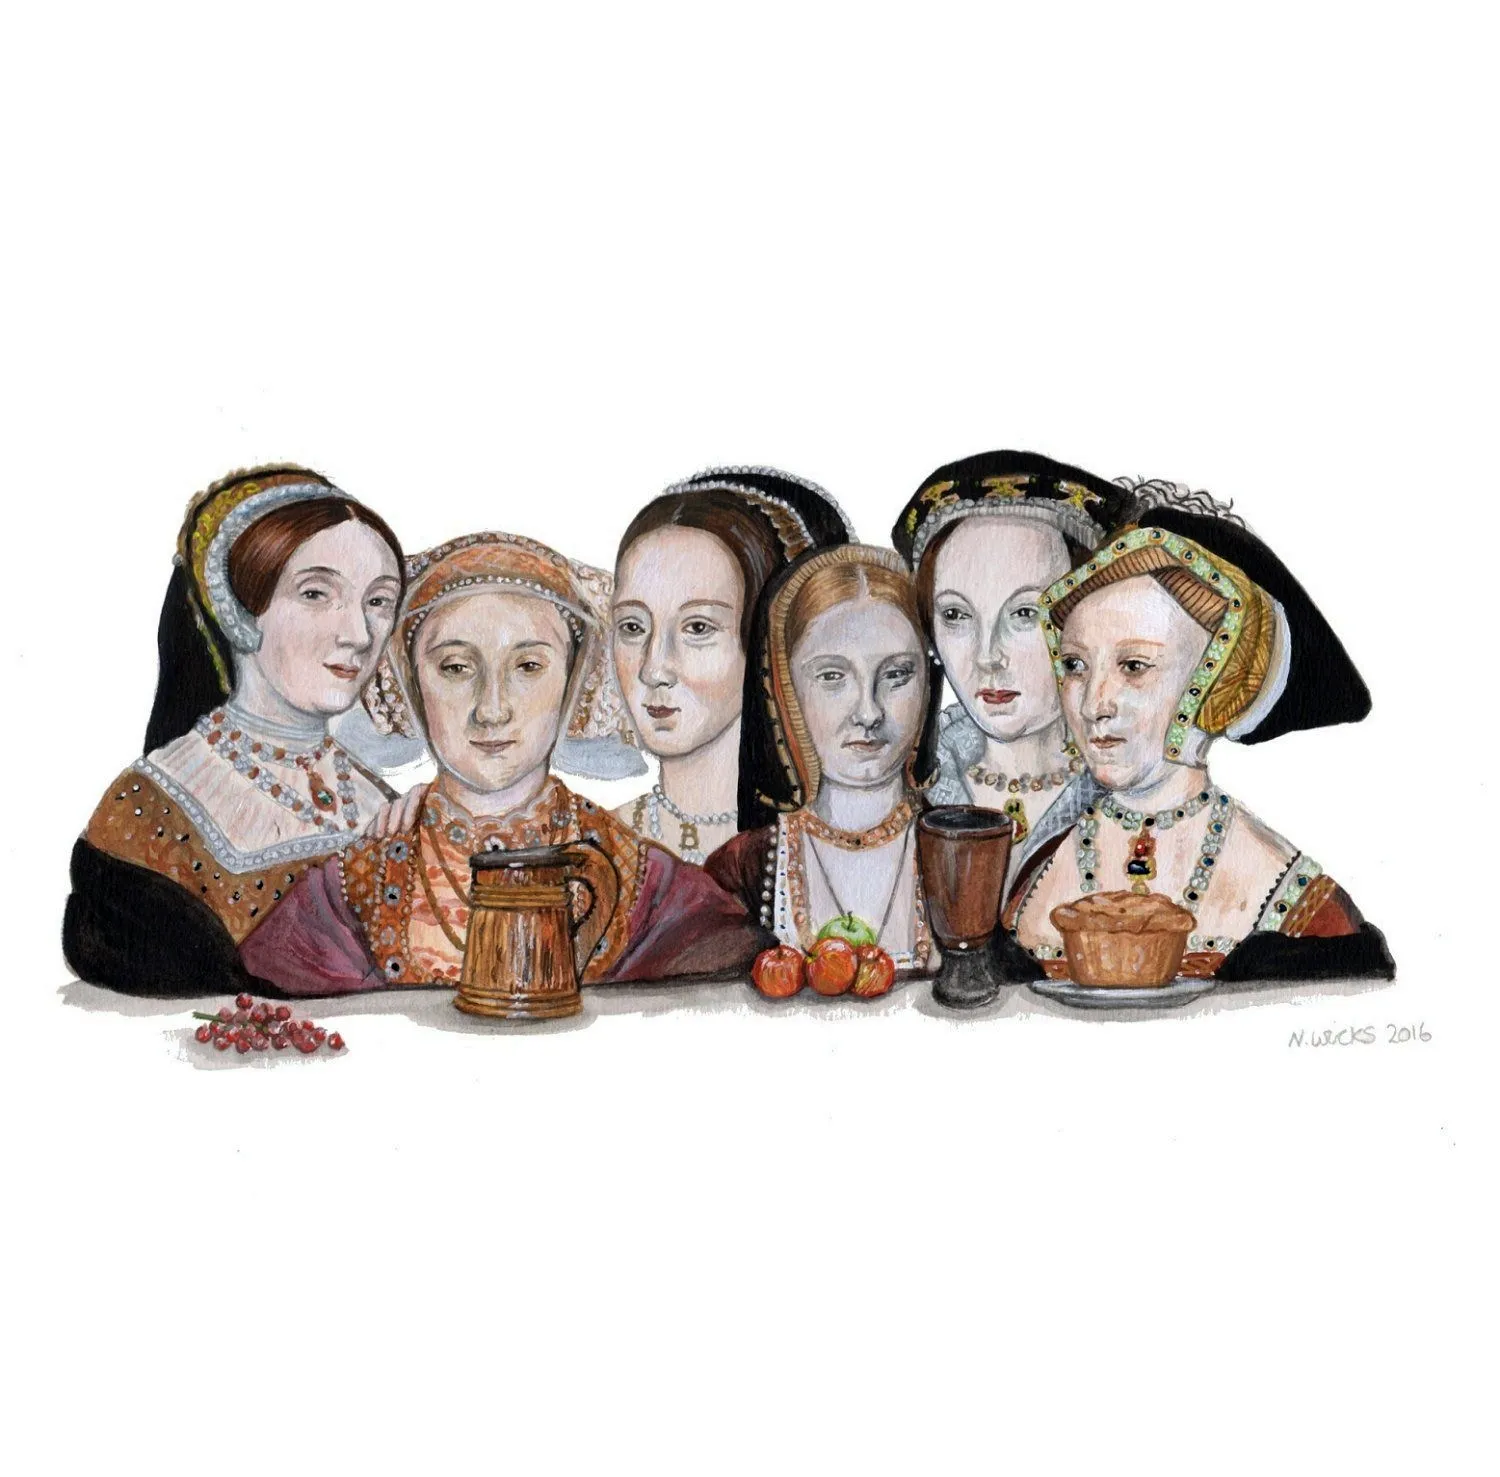 Henry VIII wives